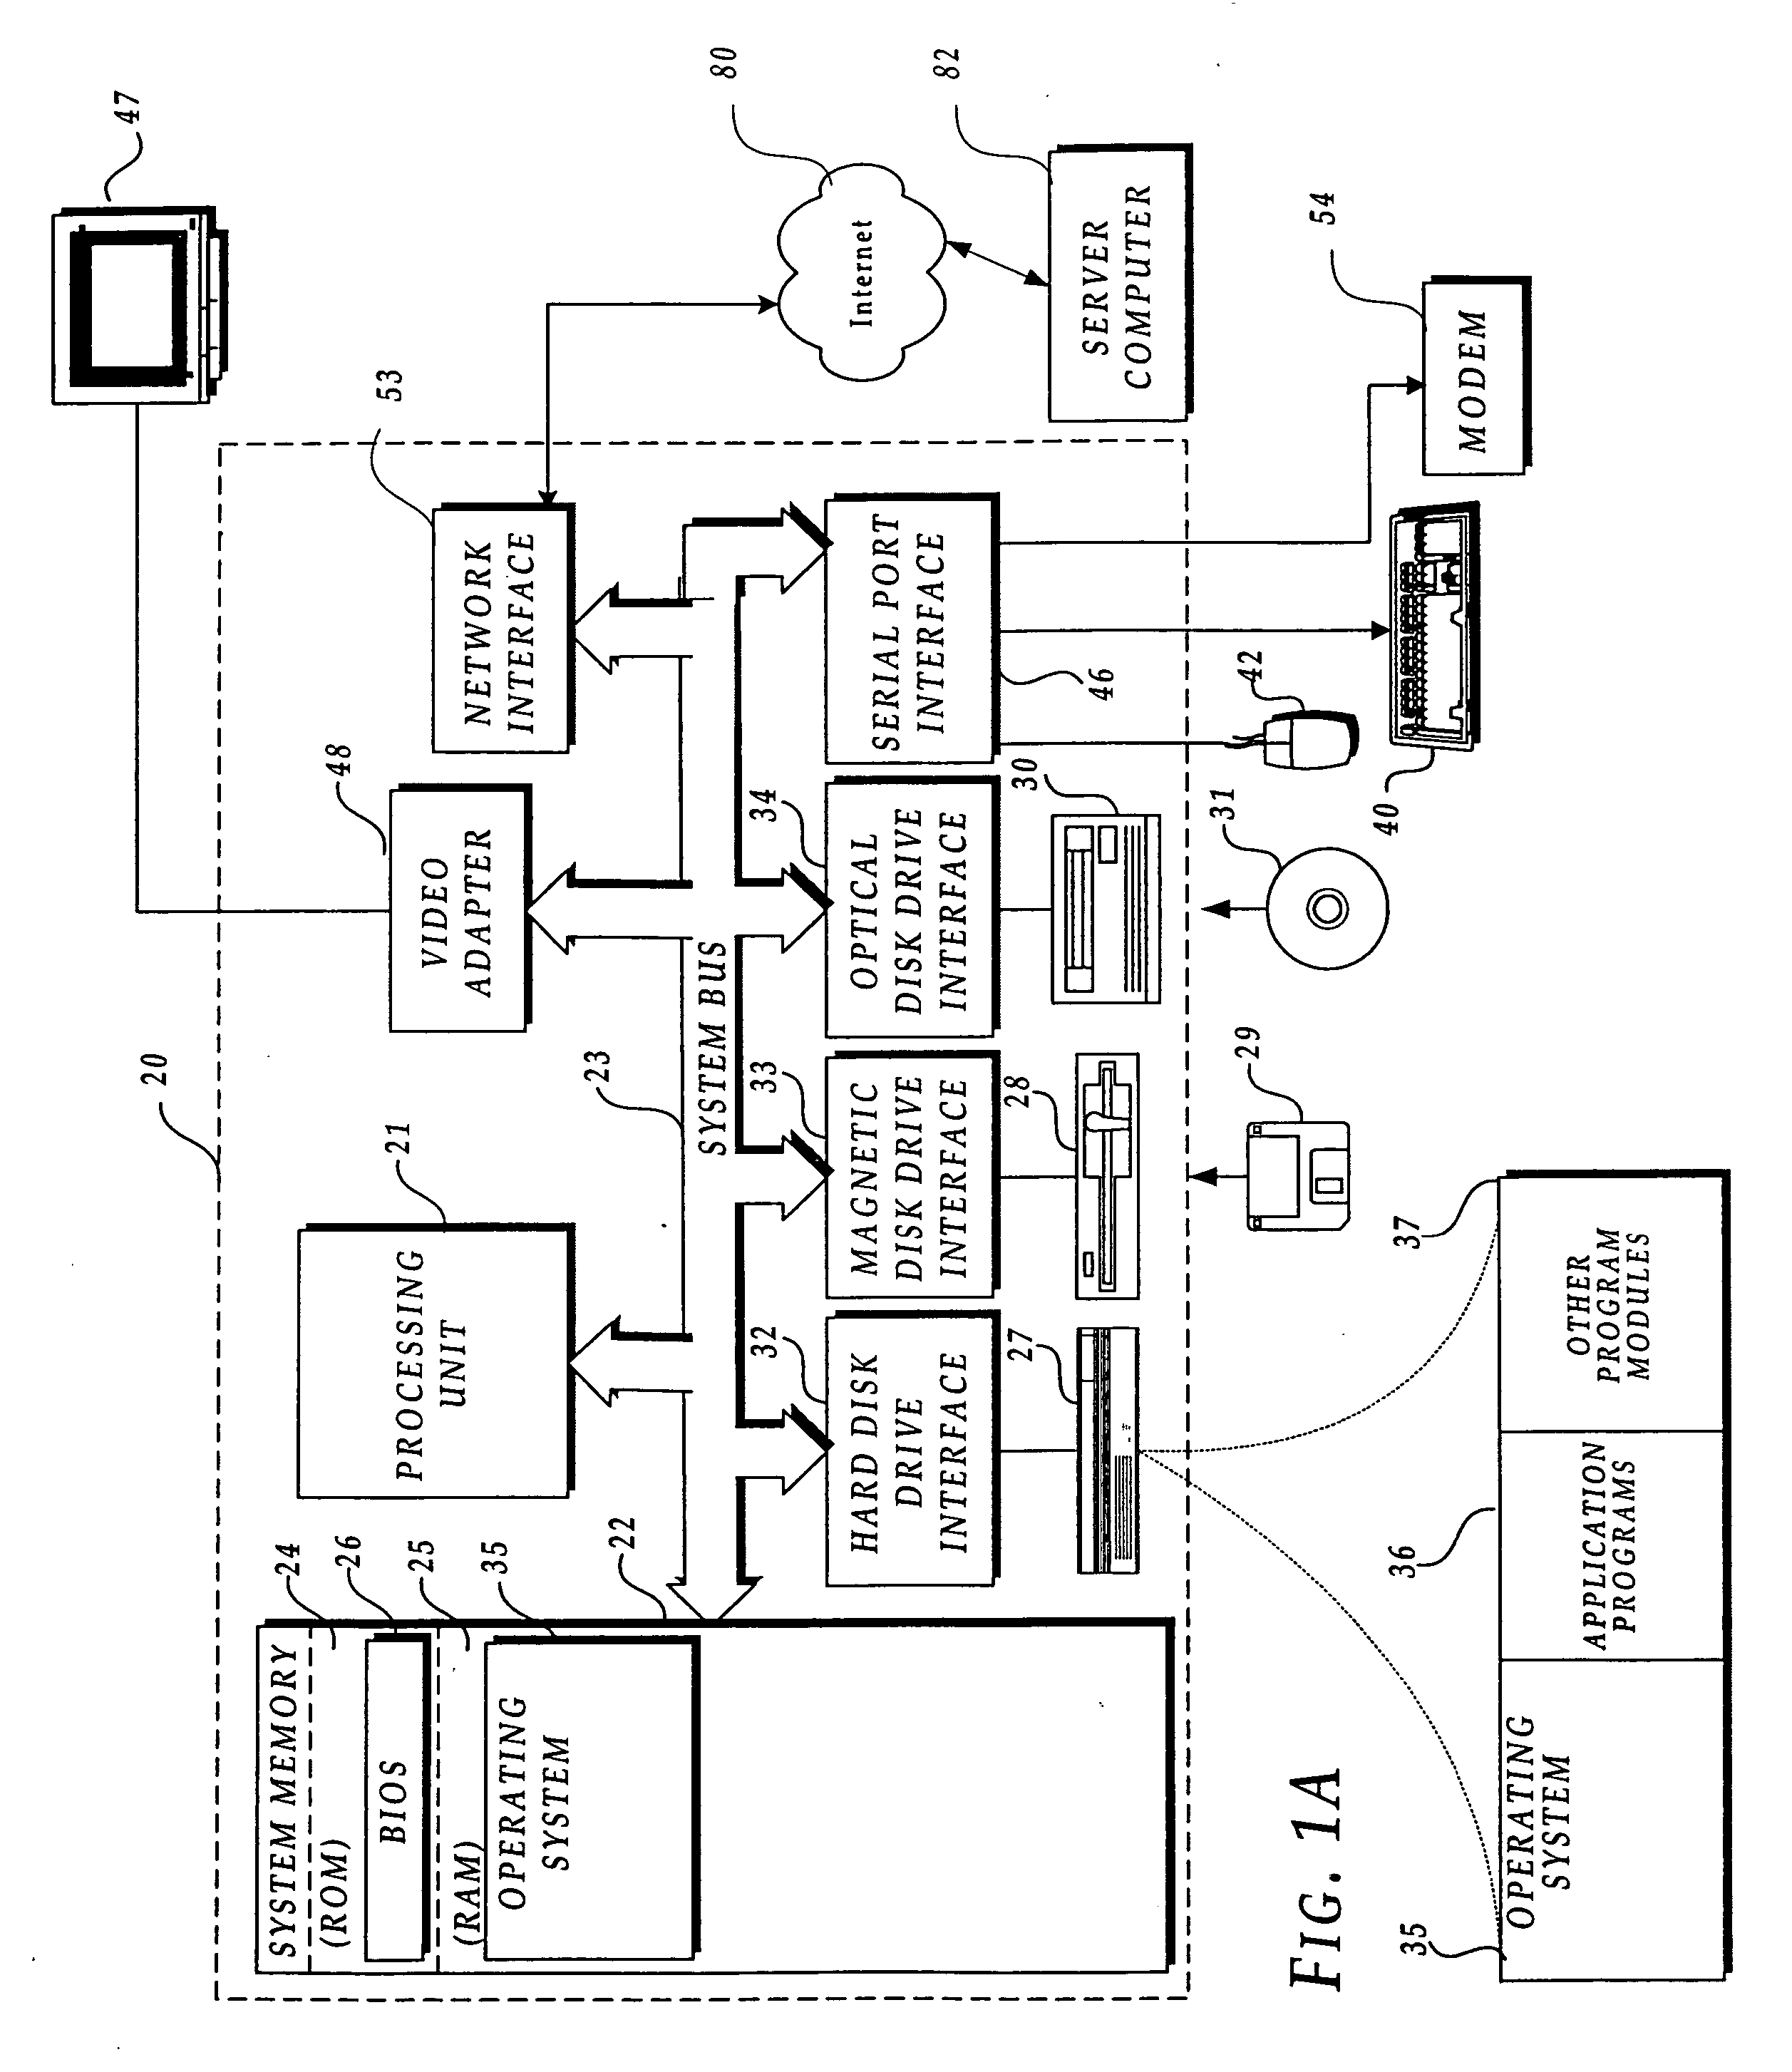 System and method for synchronizing multiple database files